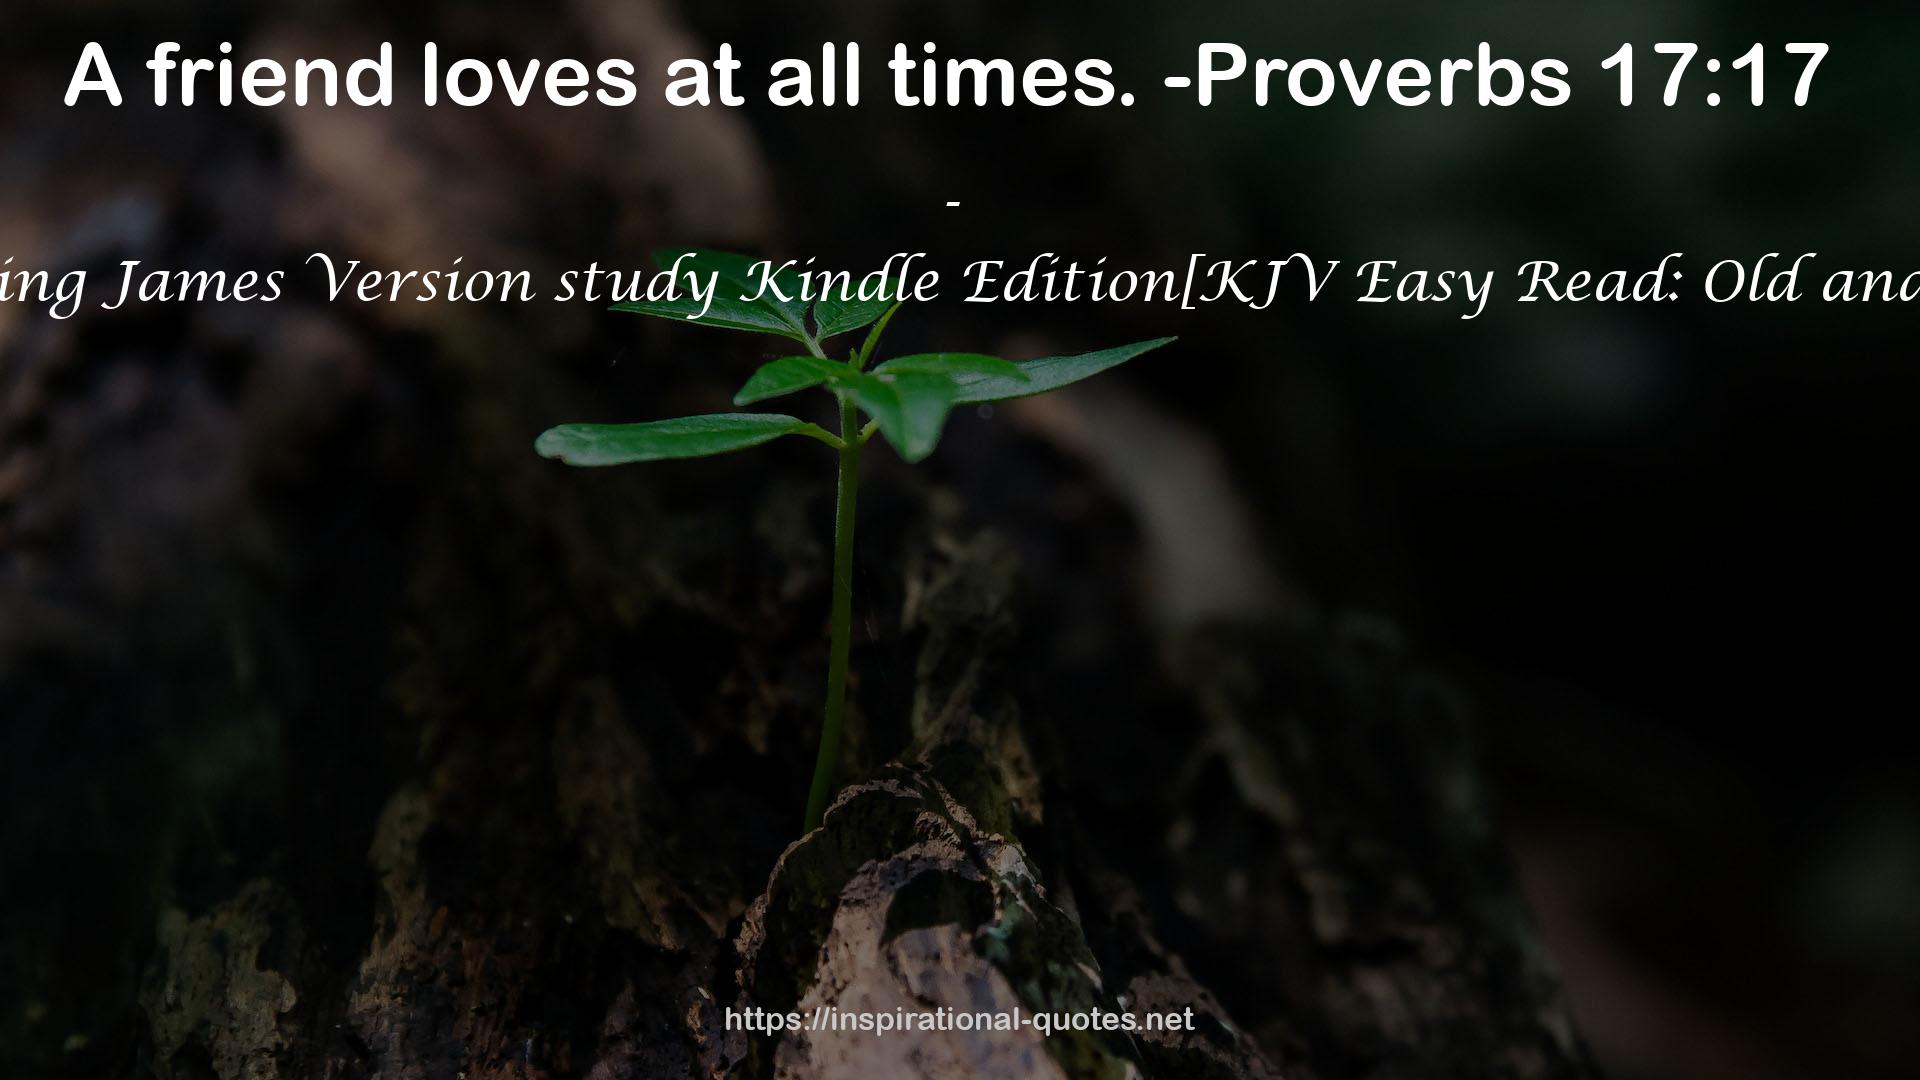 The Holy Bible King James Version study Kindle Edition[KJV Easy Read: Old and New Testament] QUOTES